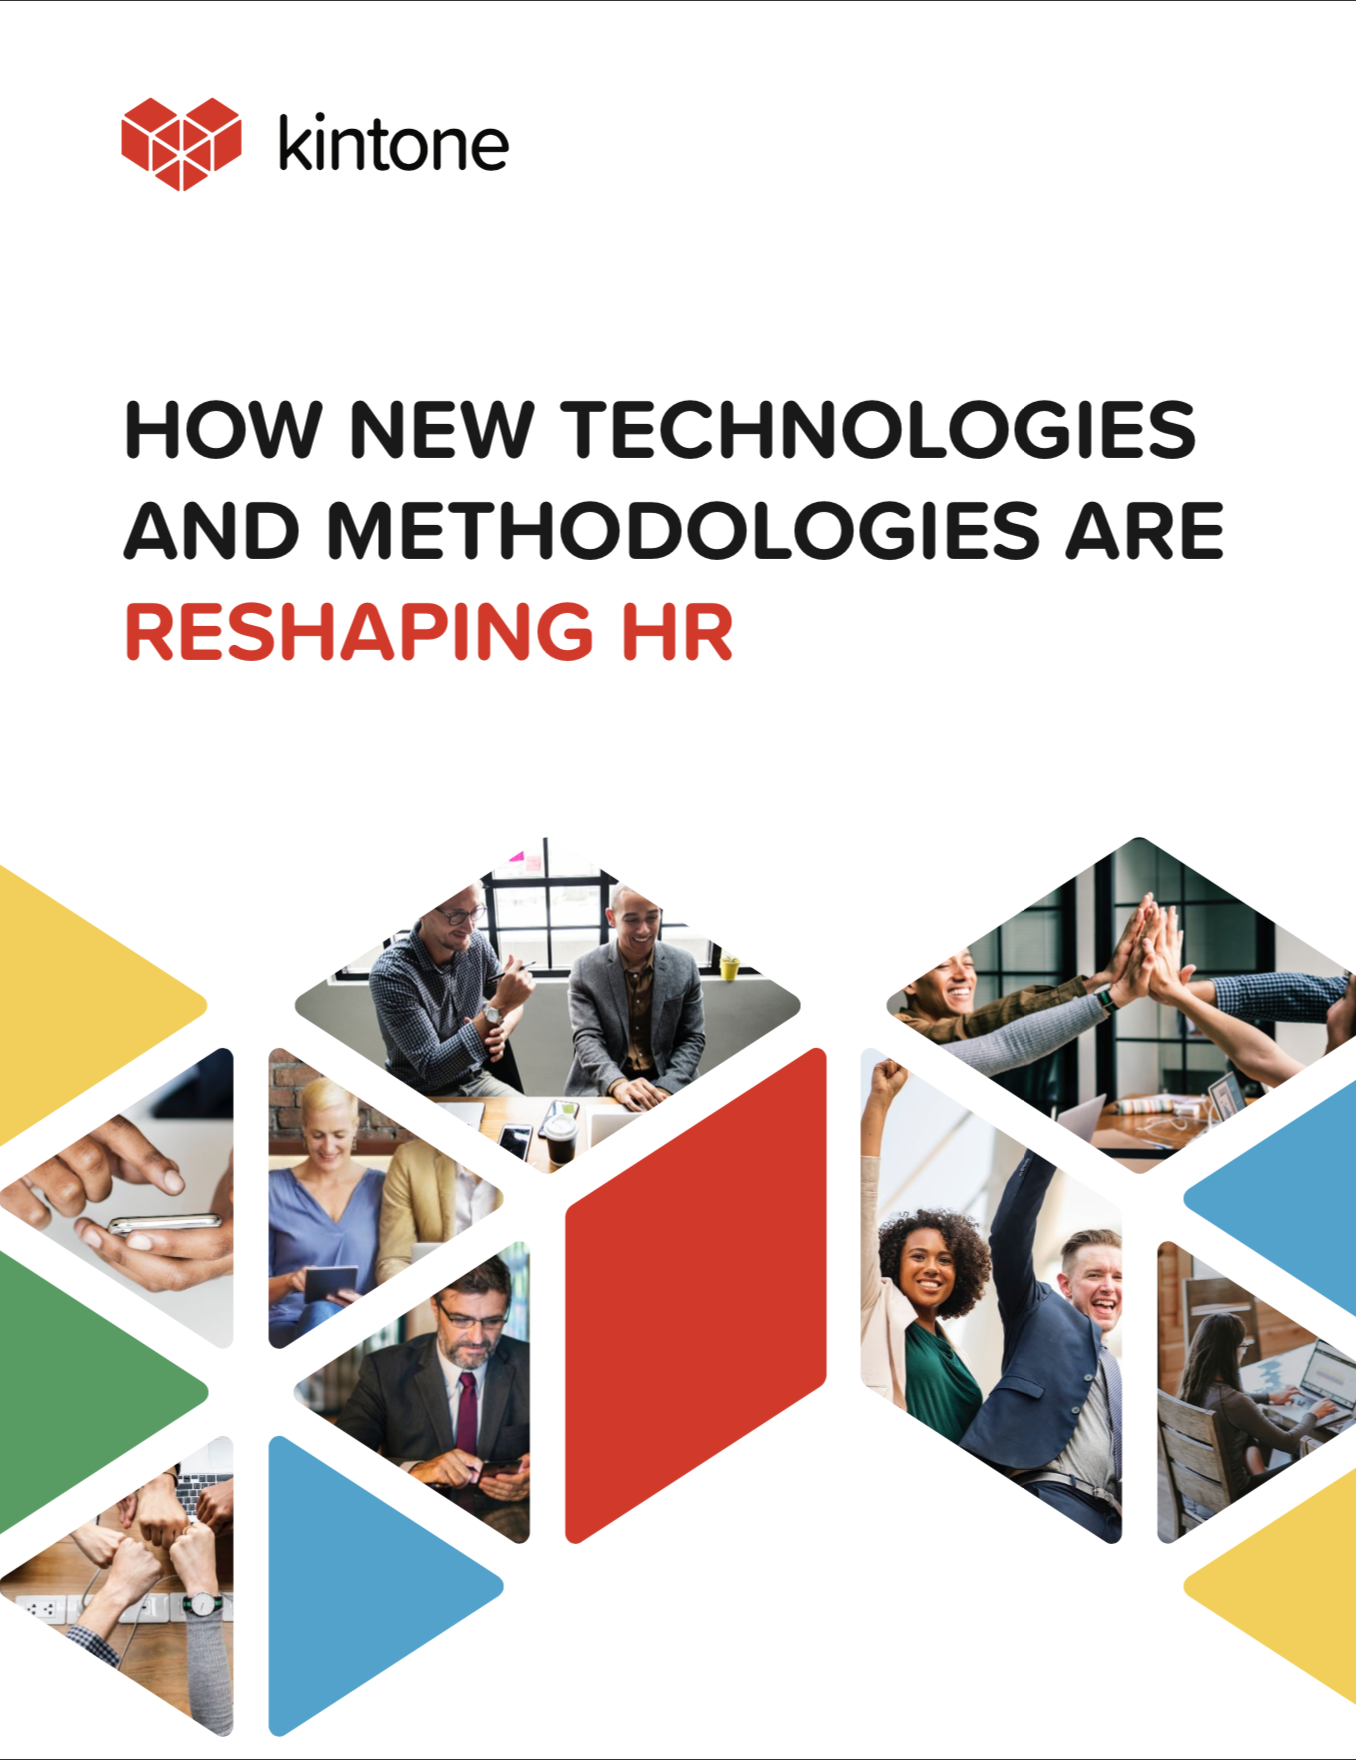 Why HR Needs to Rethink Its Tech